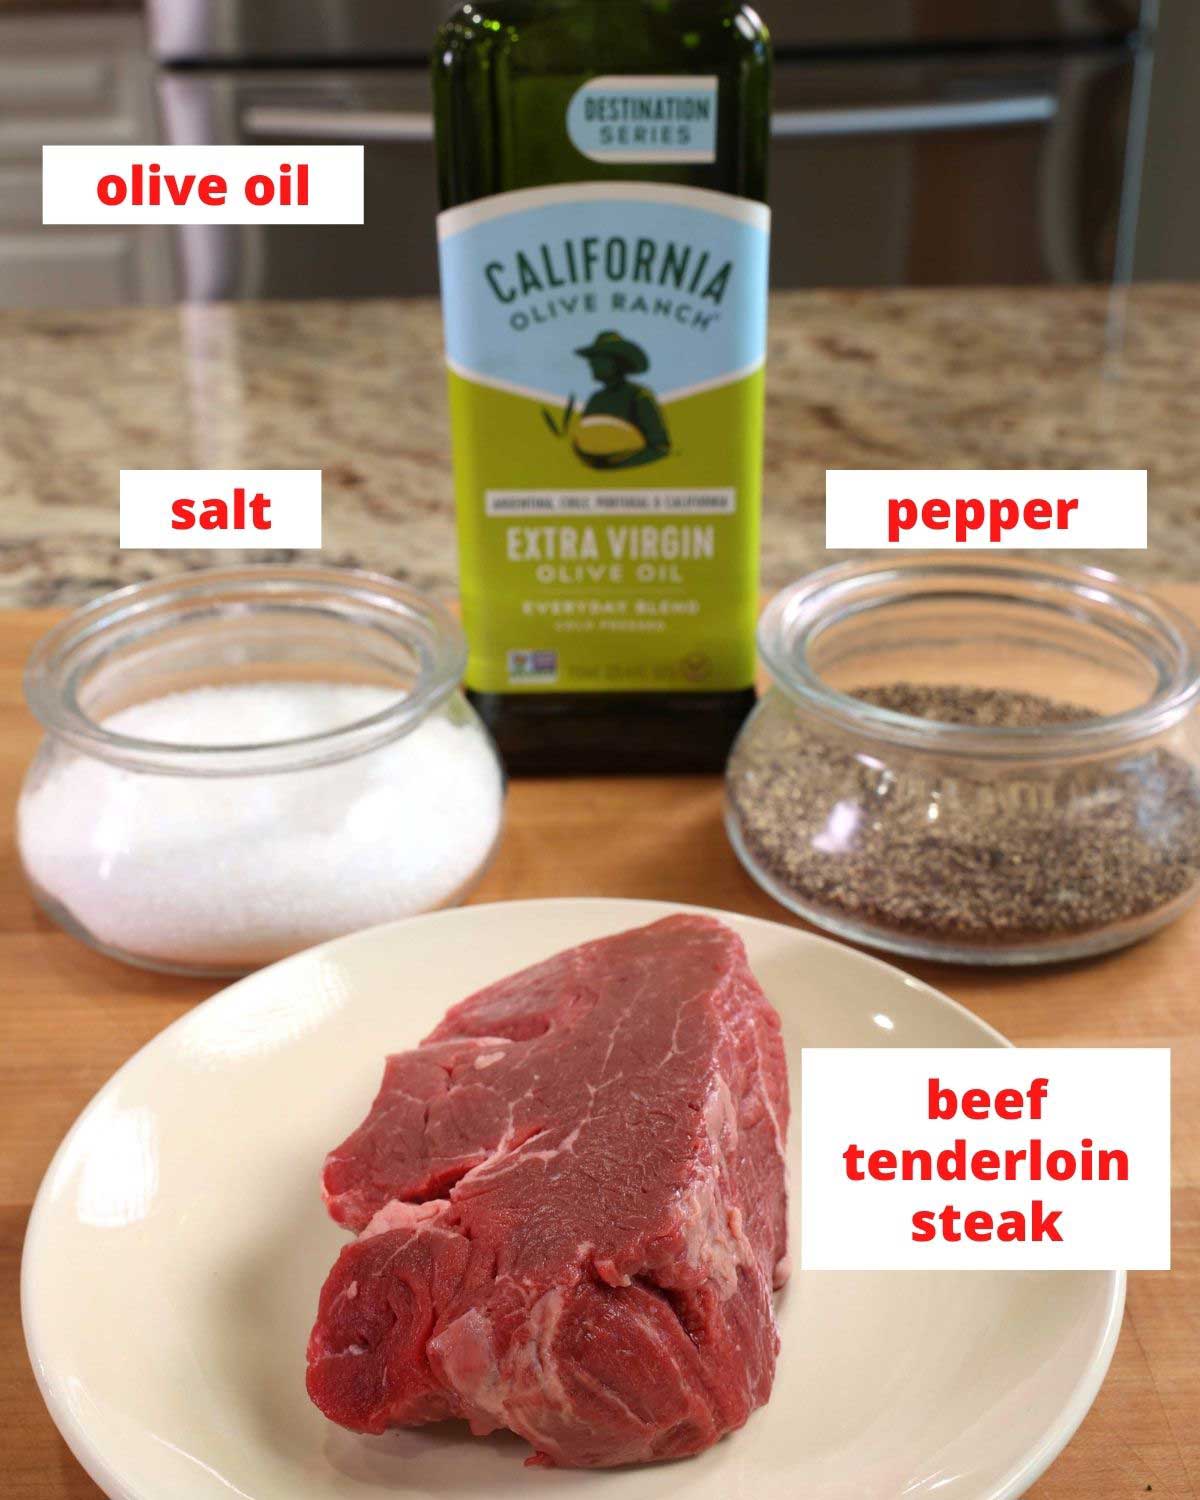 a beef tenderloin steak on a white plate next to jars of salt and pepper and a bottle of olive oil.